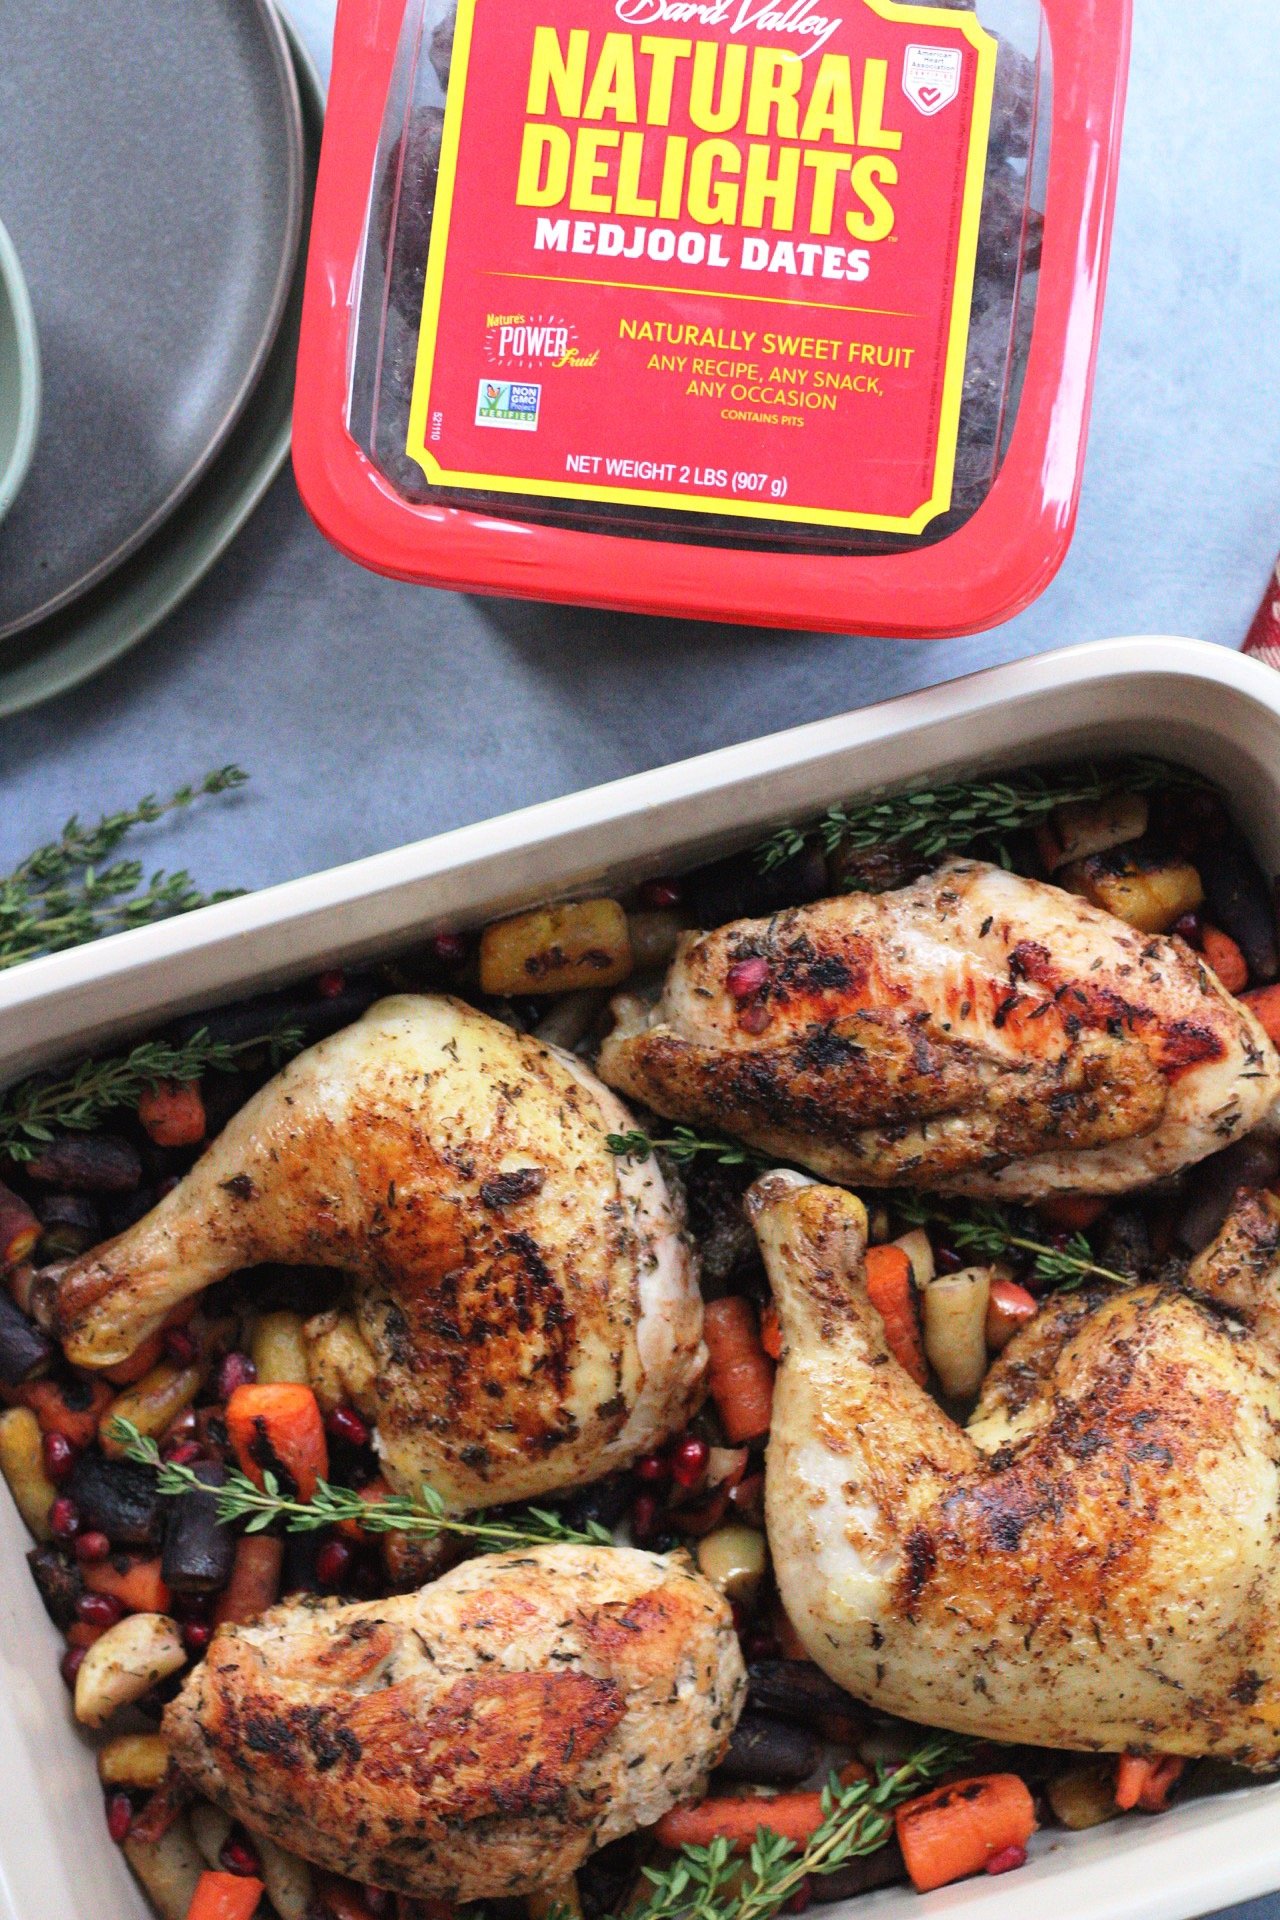 roasted chicken with medjool dates